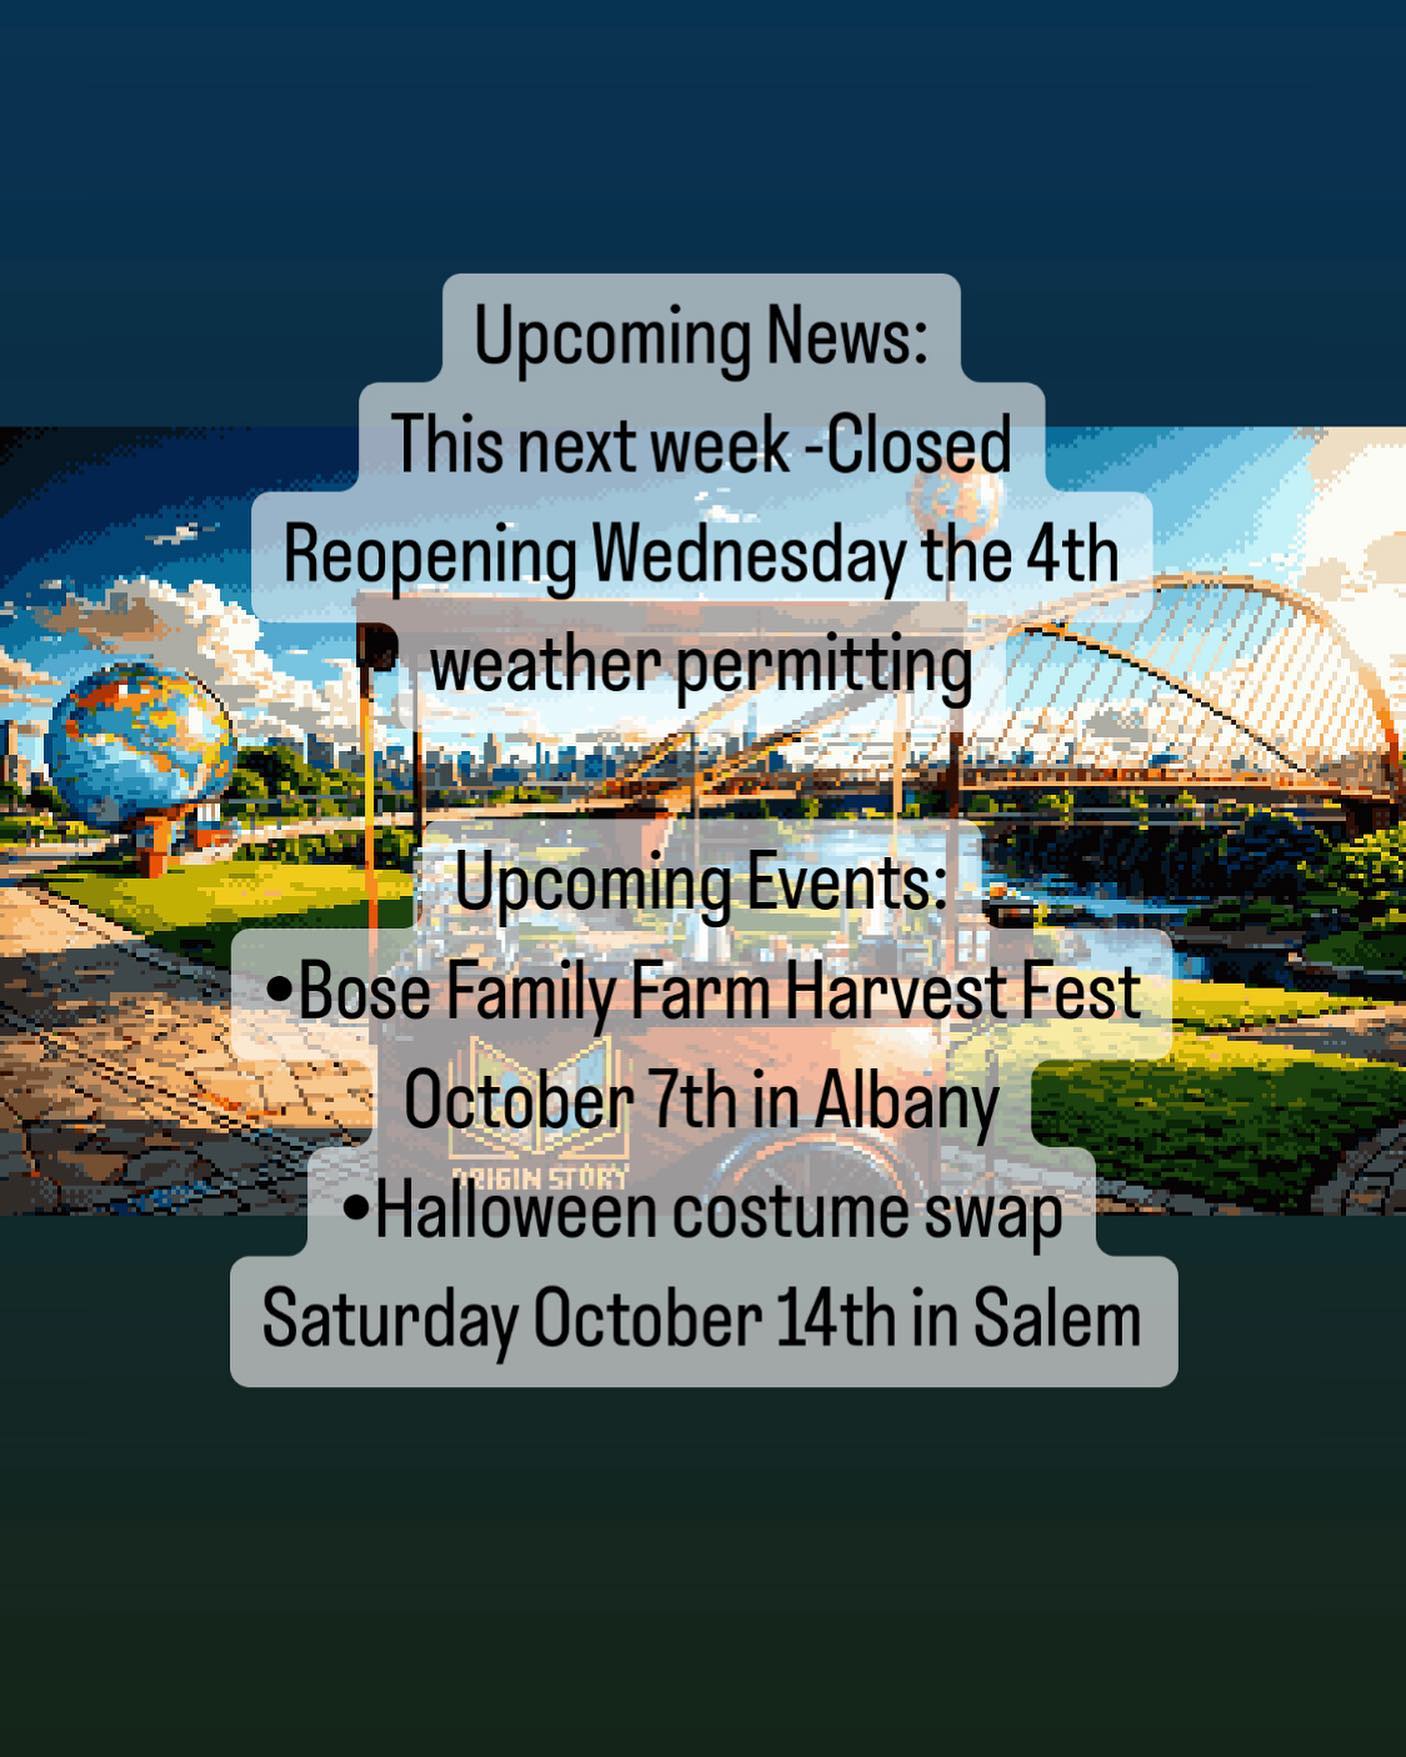 Details for the next week:
We will be closed this week due to a packed week for our family and a getaway this weekend for mom and dad! Next week if weather allows I will be in the park on Wednesday the 4th and Friday the 6th then on Saturday the 7th we will be at @bose_family_farm harvest festival! Opens at 9am! 
The following week we will be in the park Wednesday and Friday and then Saturday we will be at @salemclothproject Halloween Costume Swap! Starts at 10am!